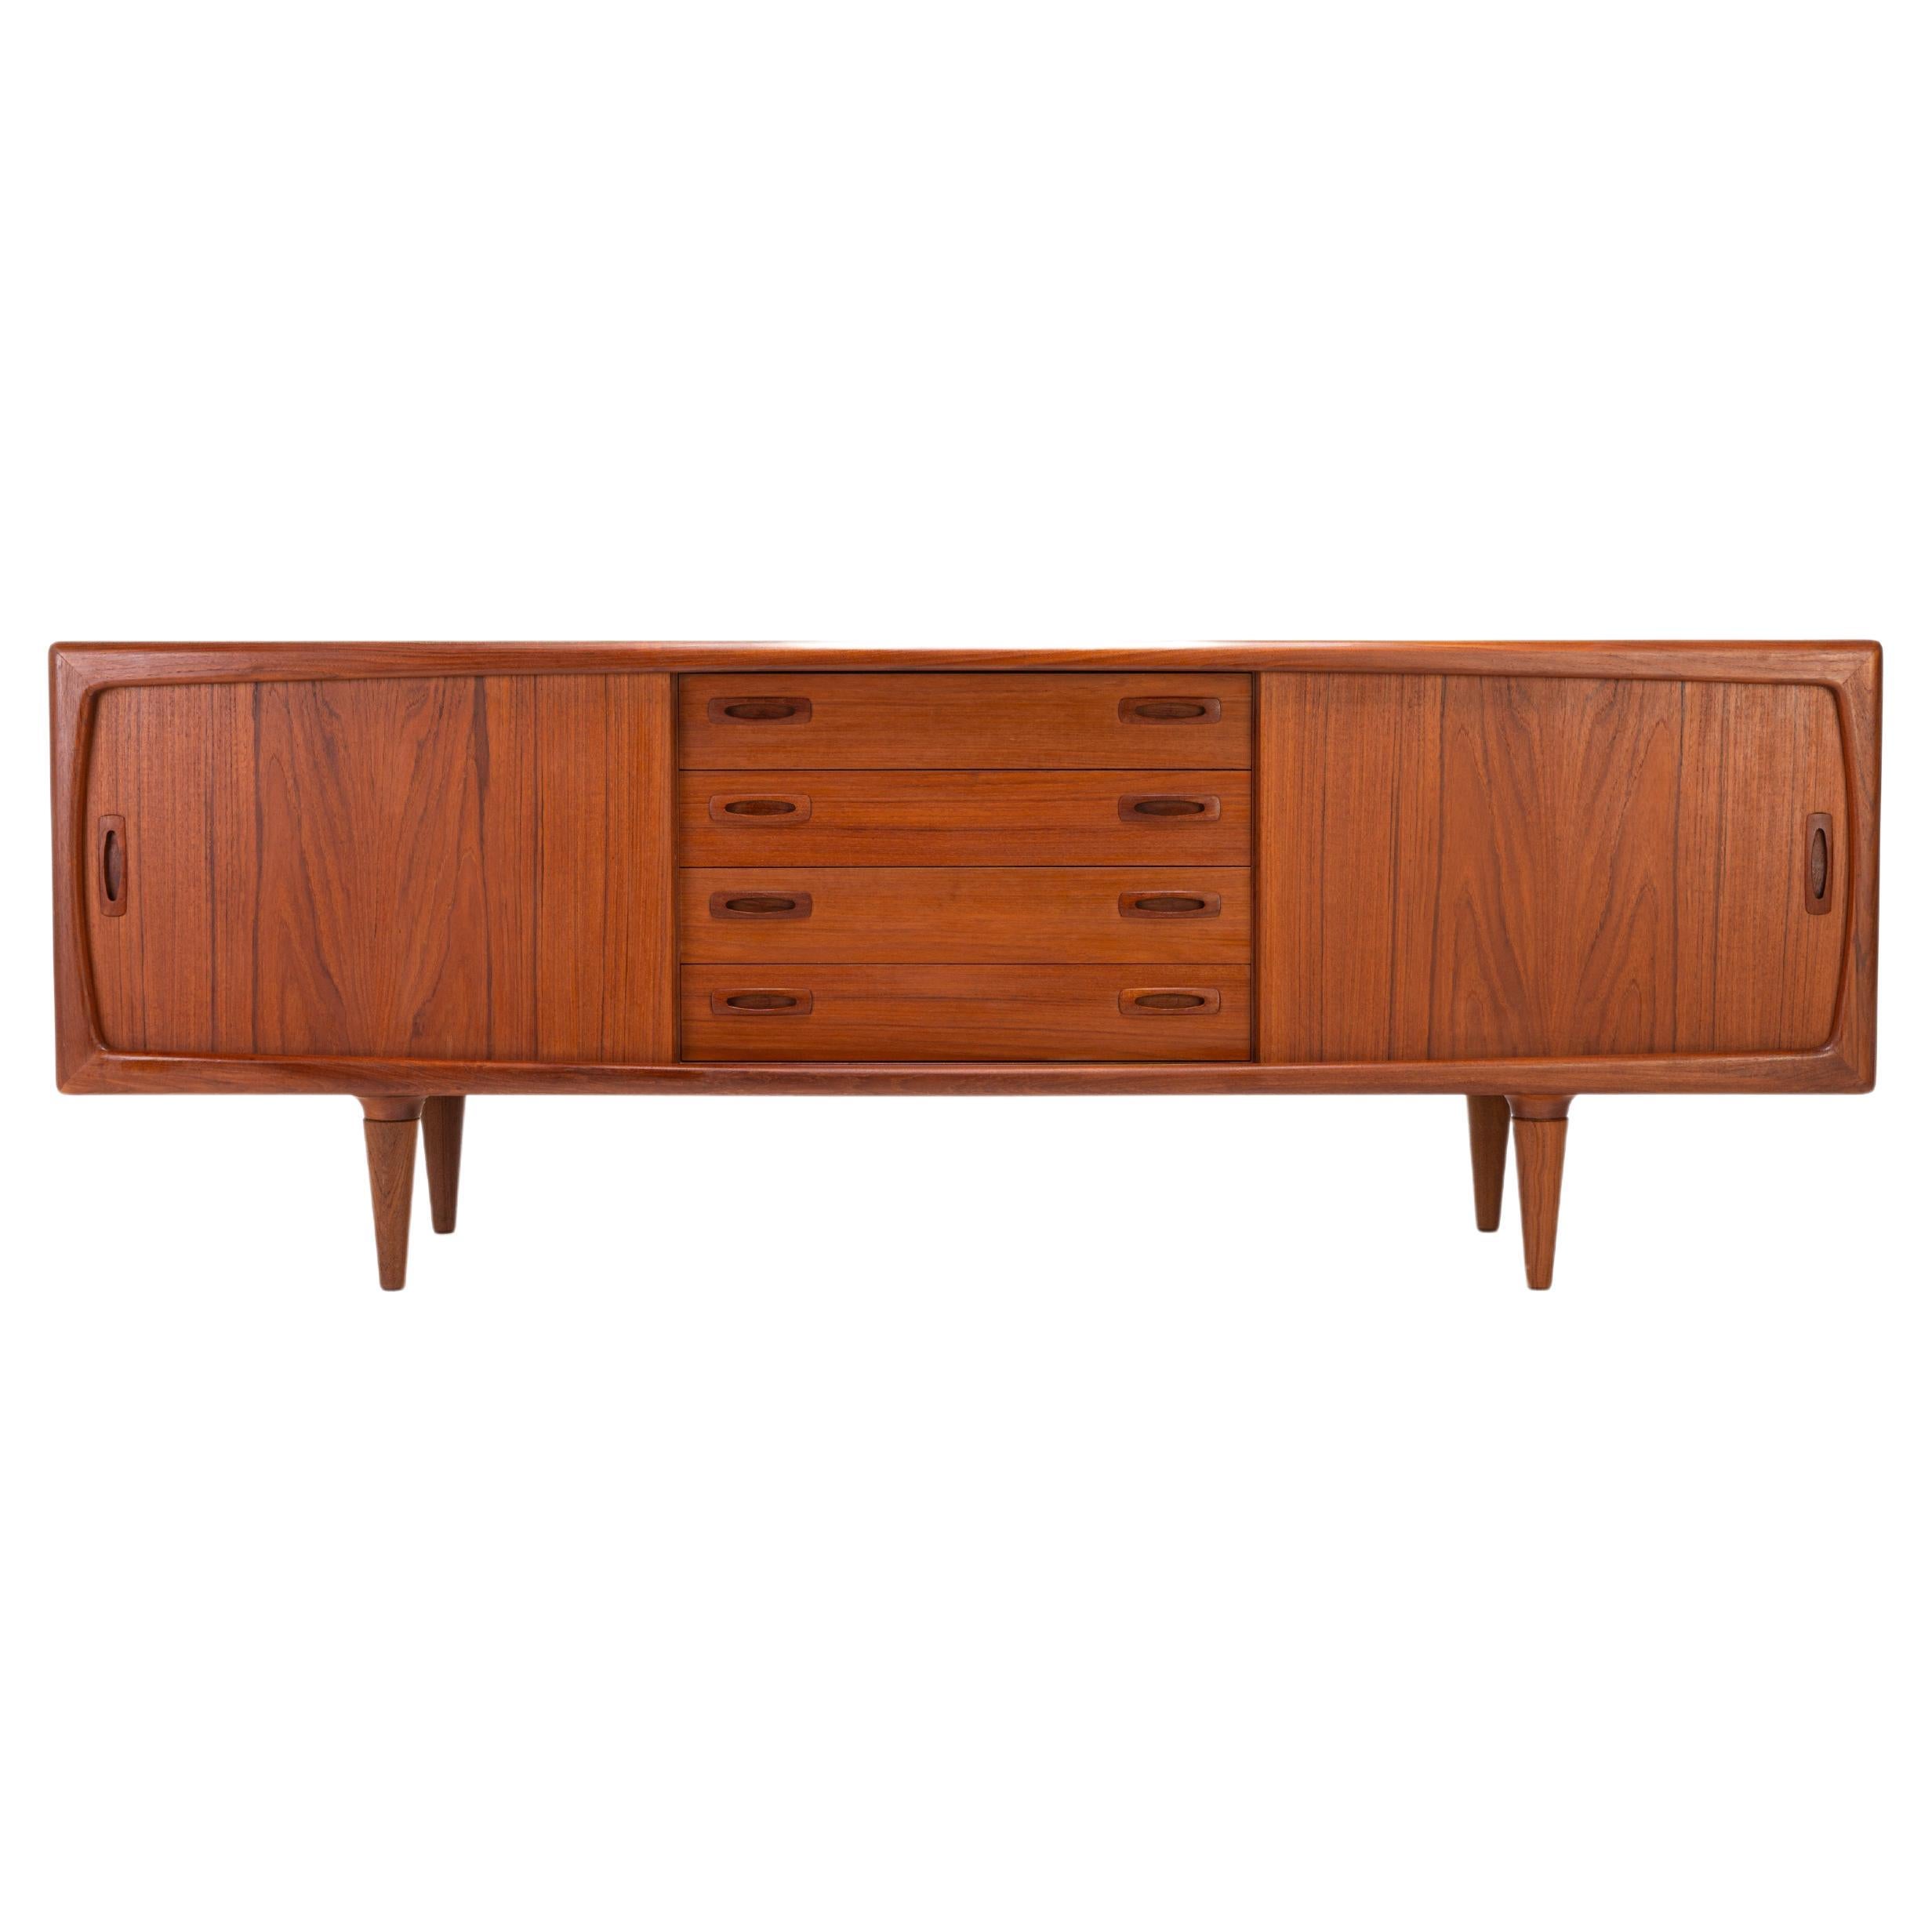 H.P. Hansen Sideboards - 13 For Sale at 1stDibs | h p hansen denmark, h.p.  hansen furniture, hp hansen credenza